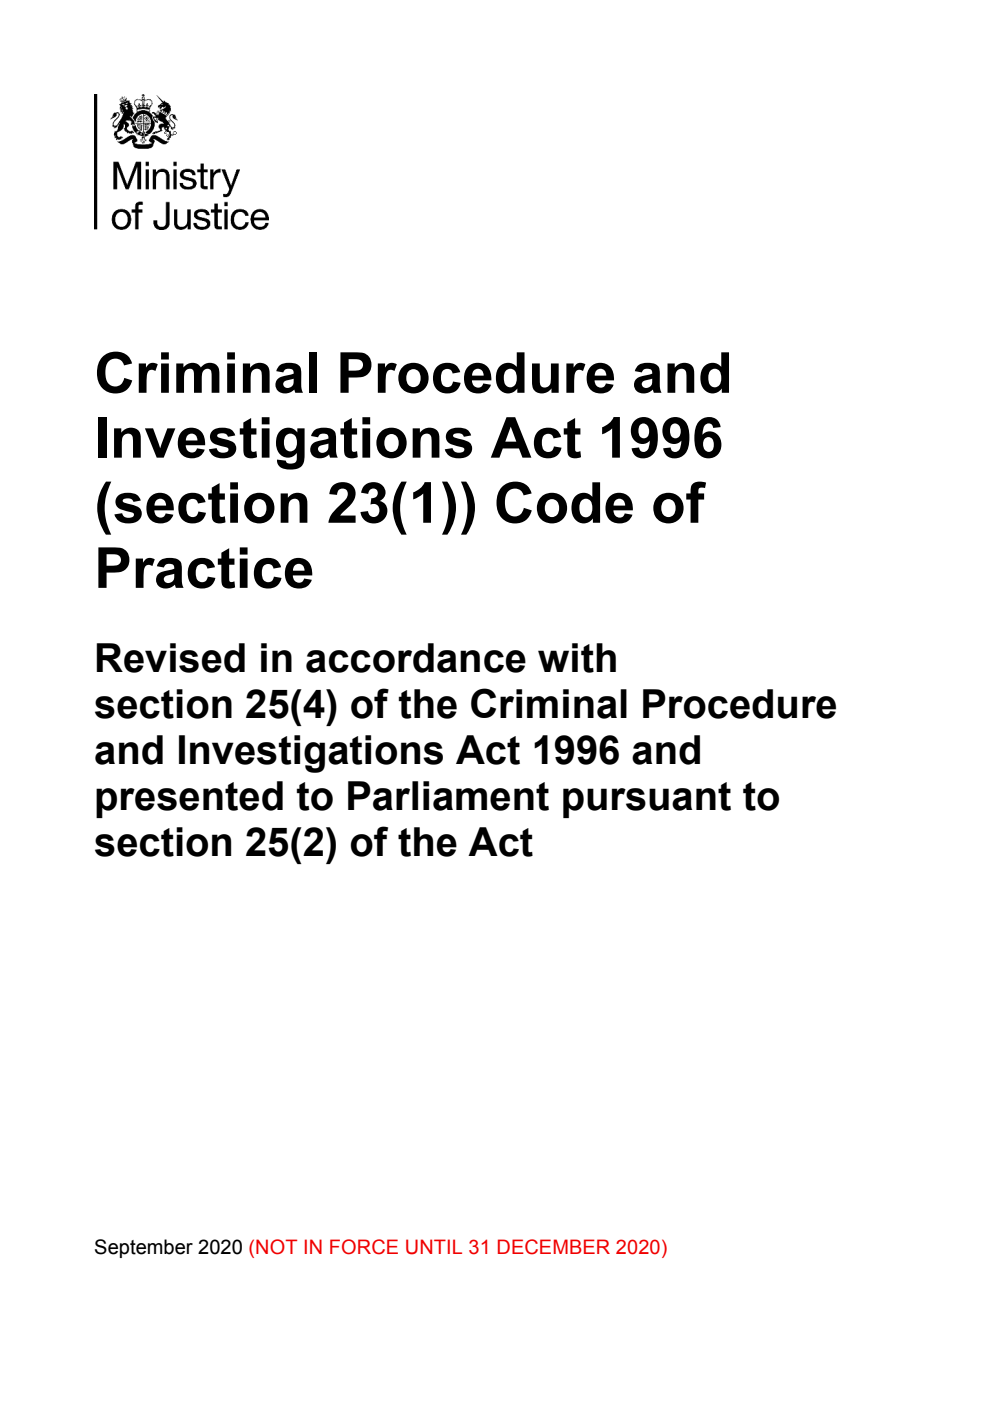 Criminal Procedure and Investigations Act 1996 (section 23(1)) Code of Practice. Revised in accordance with section 25(4) of the Criminal Procedure and Investigations Act 1996 and presented to Parliament pursuant to section 25(2) of the Act